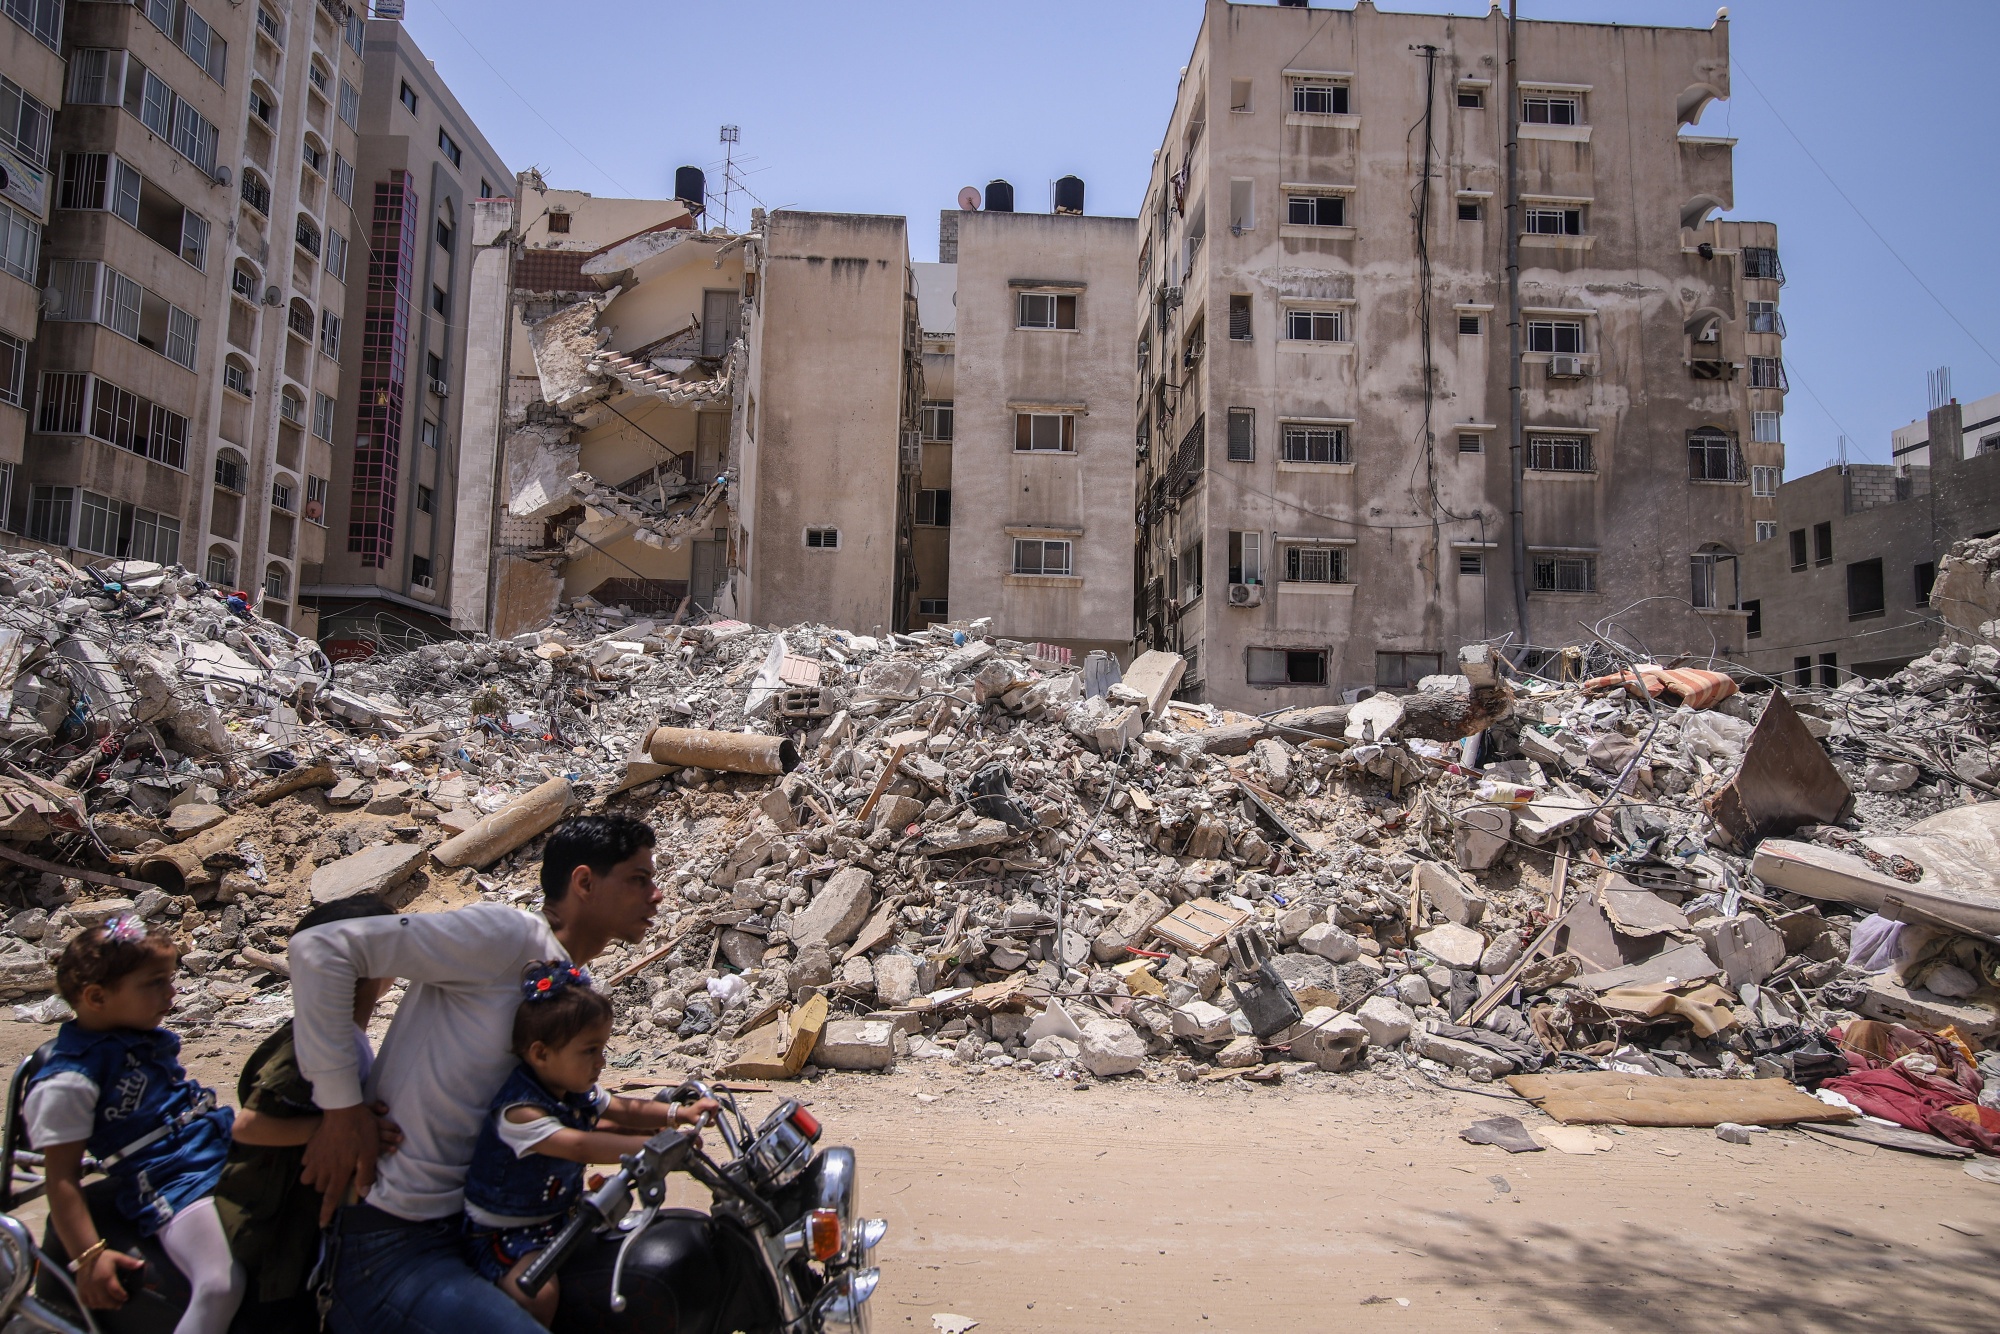 Egyptian President estimates Gaza rebuilding cost to exceed $90 billion (Credits: Bloomberg)